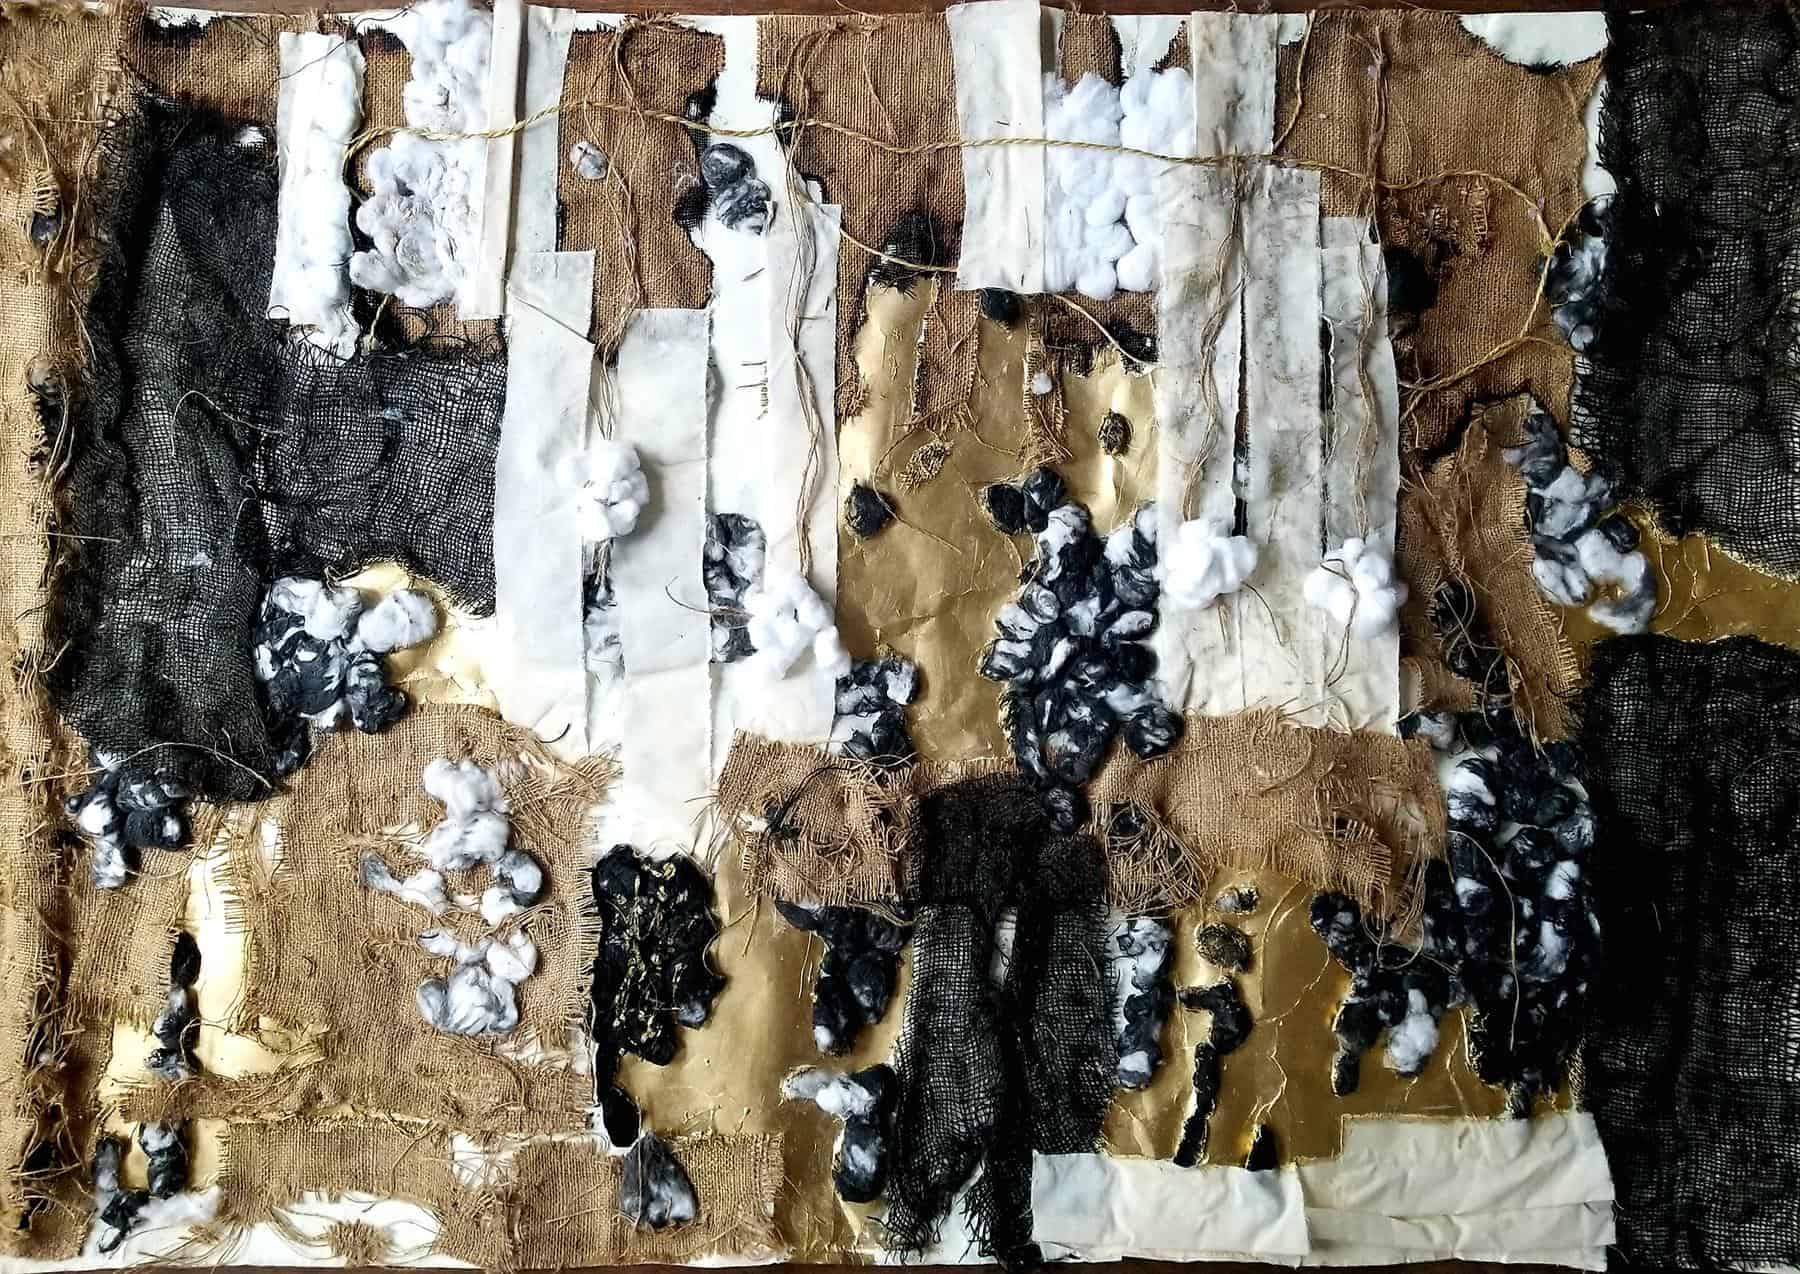 Kimberly Becoat, Work Song (High Cotton Series), 2018. Burned burlap, cotton, muslin, sumi ink, gold leaf, acrylic, collaged imagery on paper, 36’’ x 52’’.